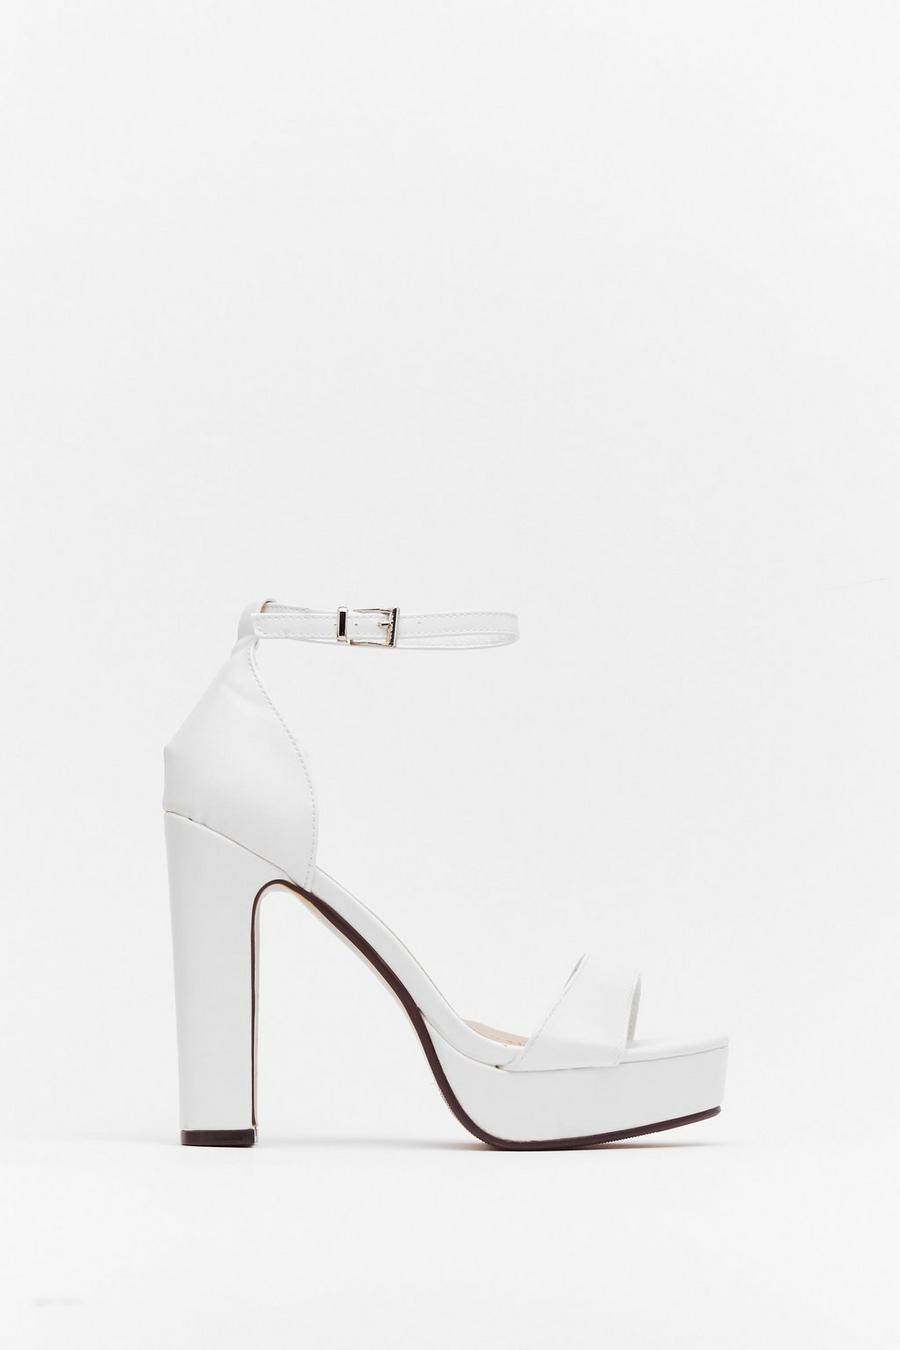 On the Rise Faux Leather Platform Heels